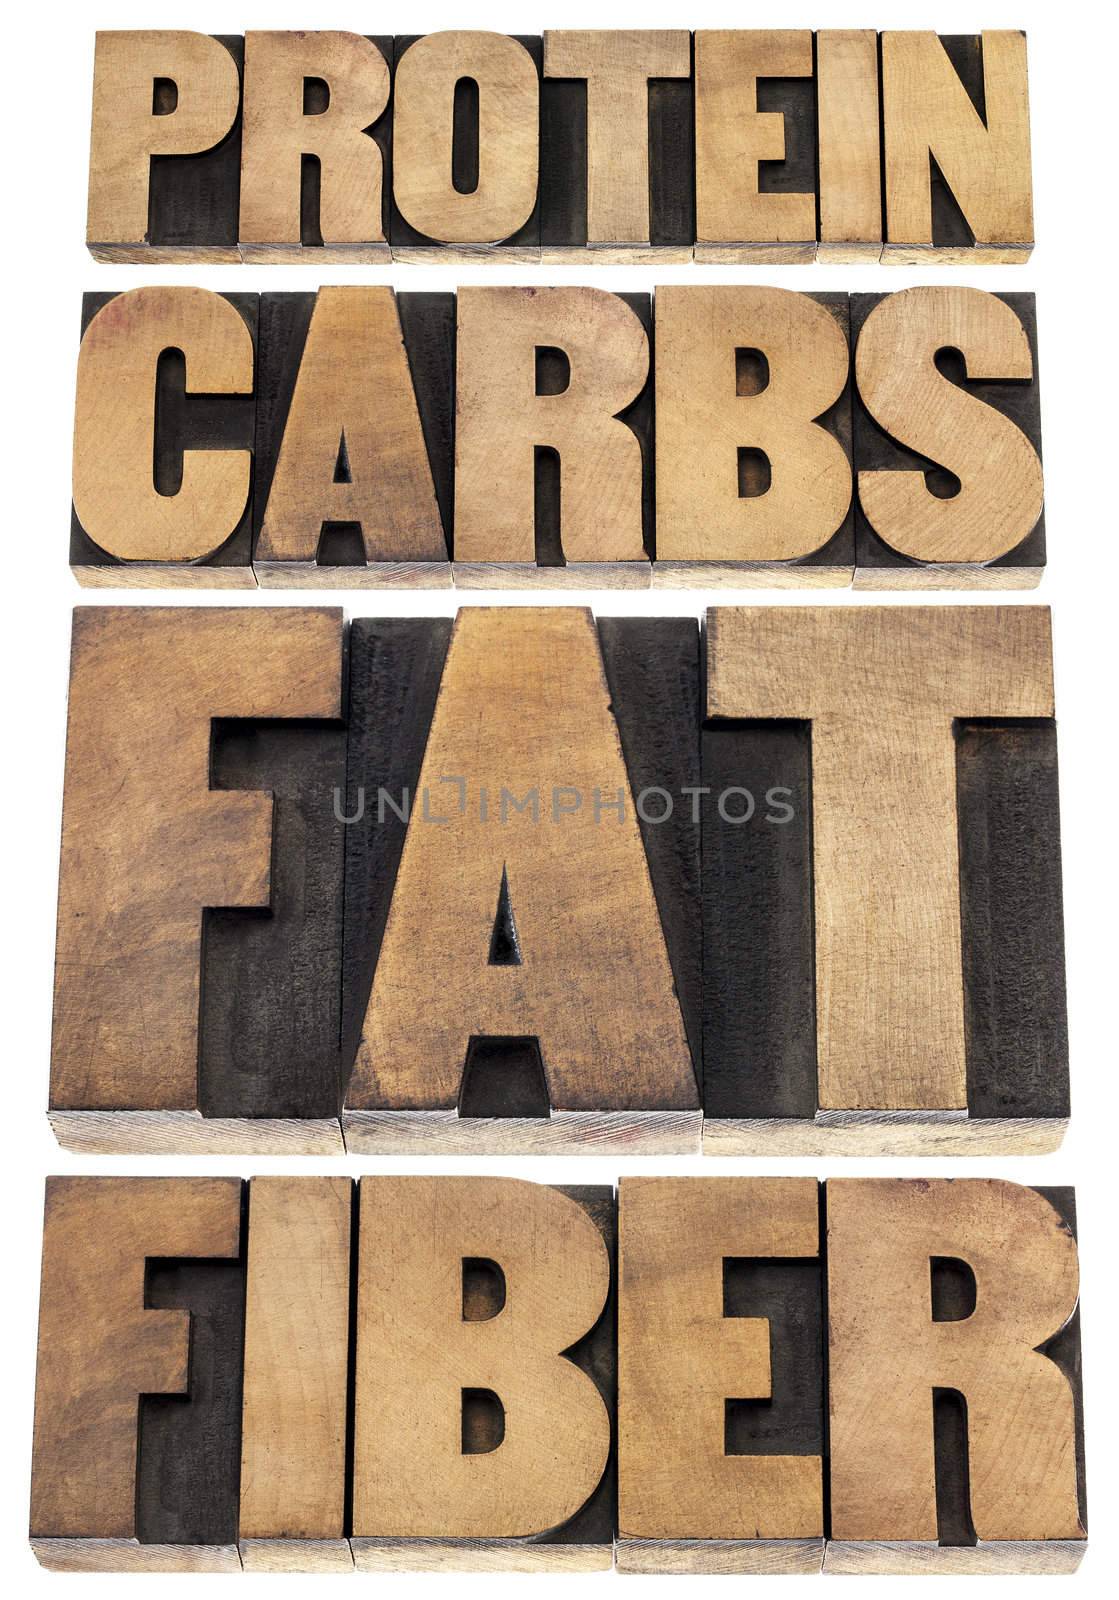 protein, carbs, fat, fiber - dietary components of food - - isolated text in letterpress wood type printing blocks